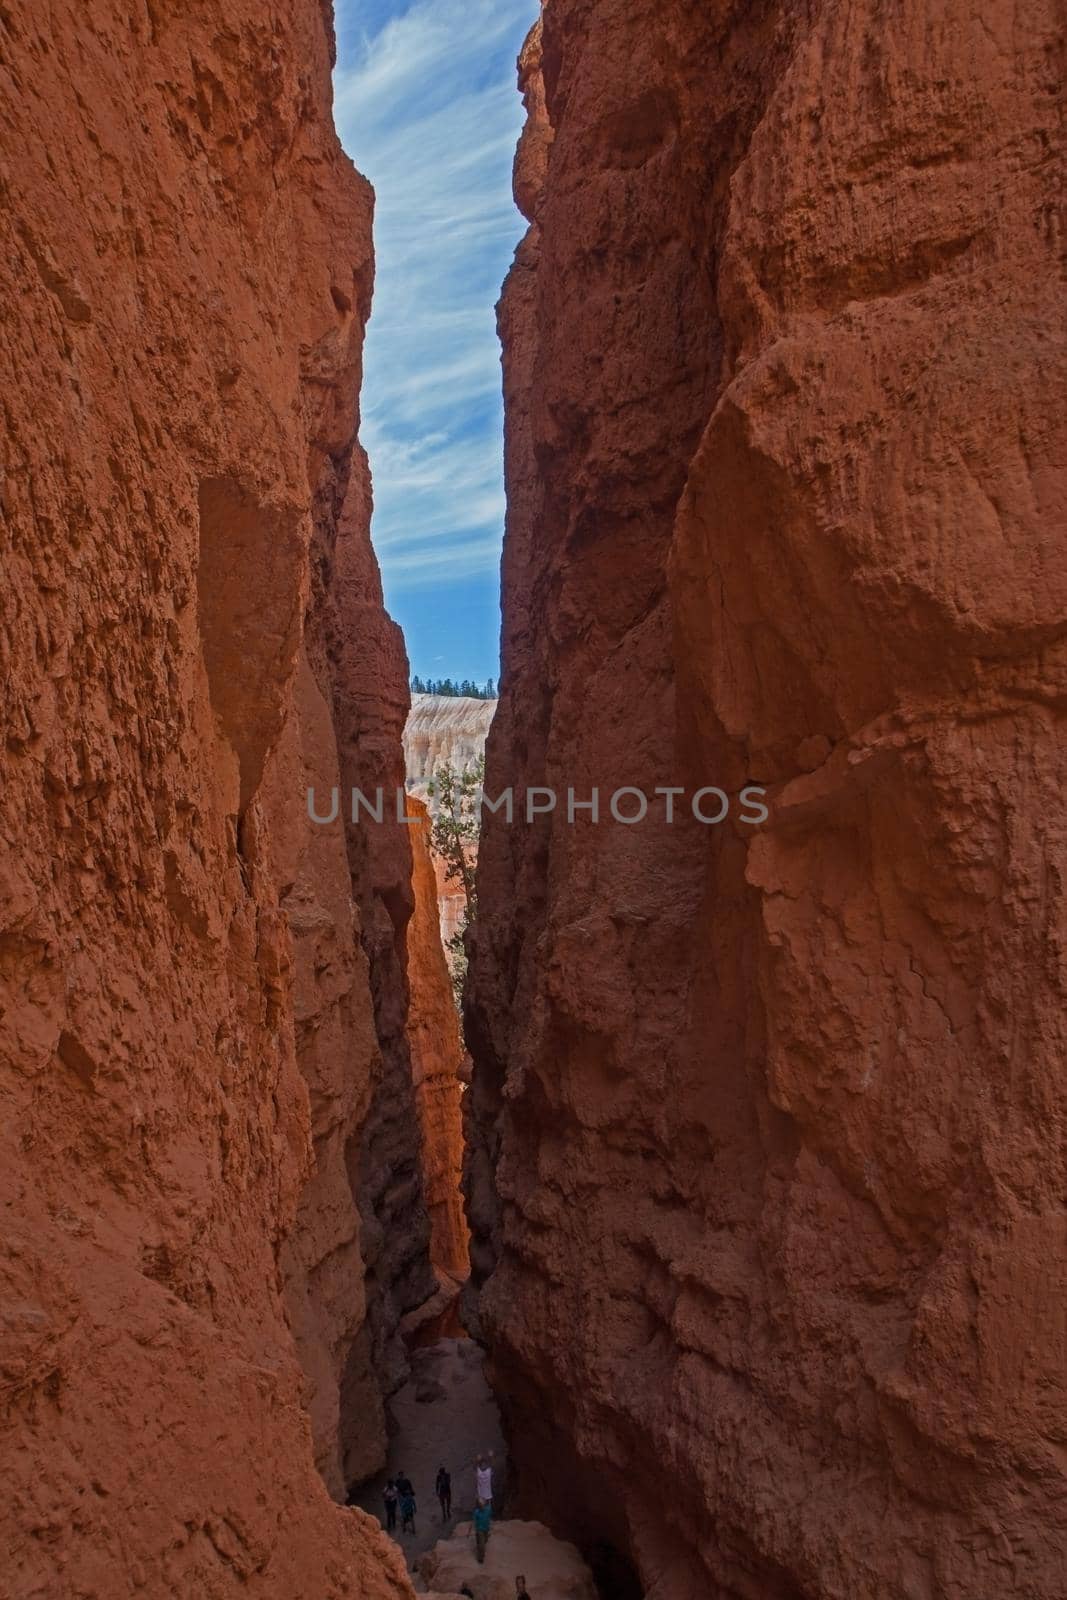 The hiking trail of the Navajo Loop winds through the hoodoos of Bryce Canyon National Park